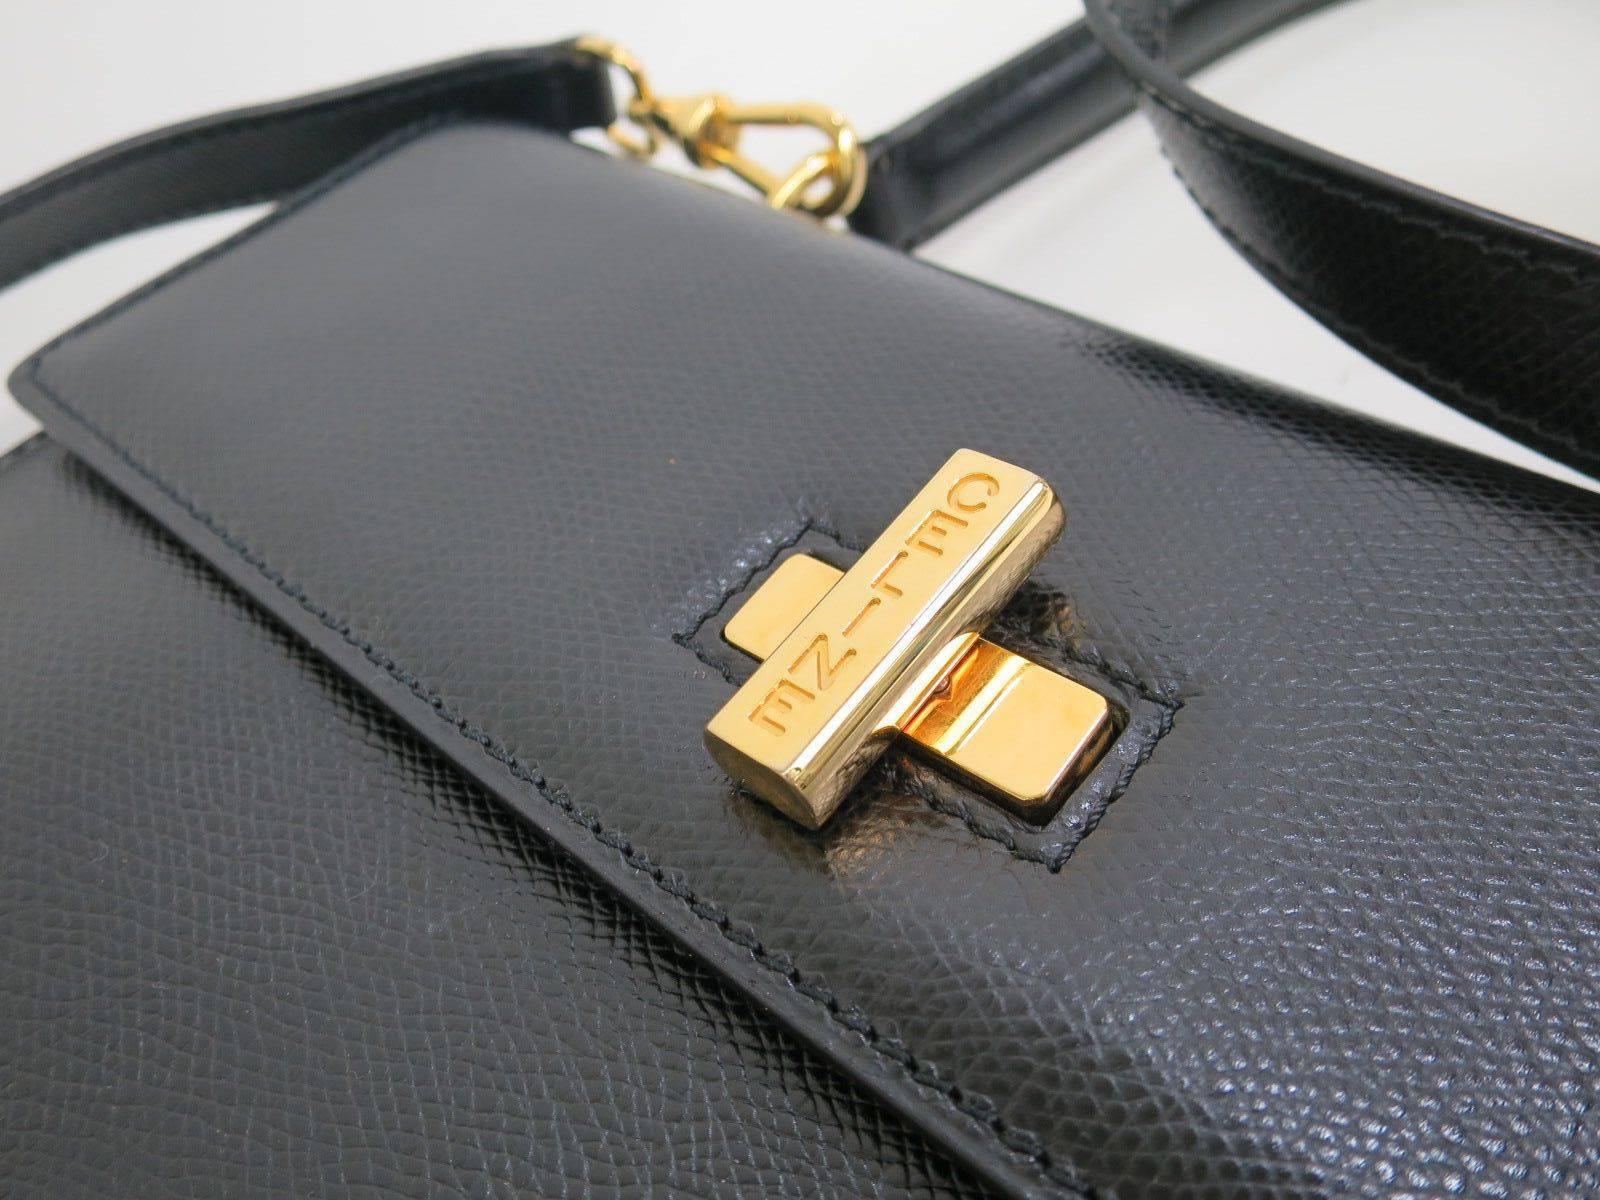 CURATOR'S NOTES

Understated glamour best describes this rich vintage Celine leather box bag.  Features gold Celine branded turn lock closure and removable shoulder strap.

Leather
Gold hardware
Turn lock closure
Made in Italy
Date code